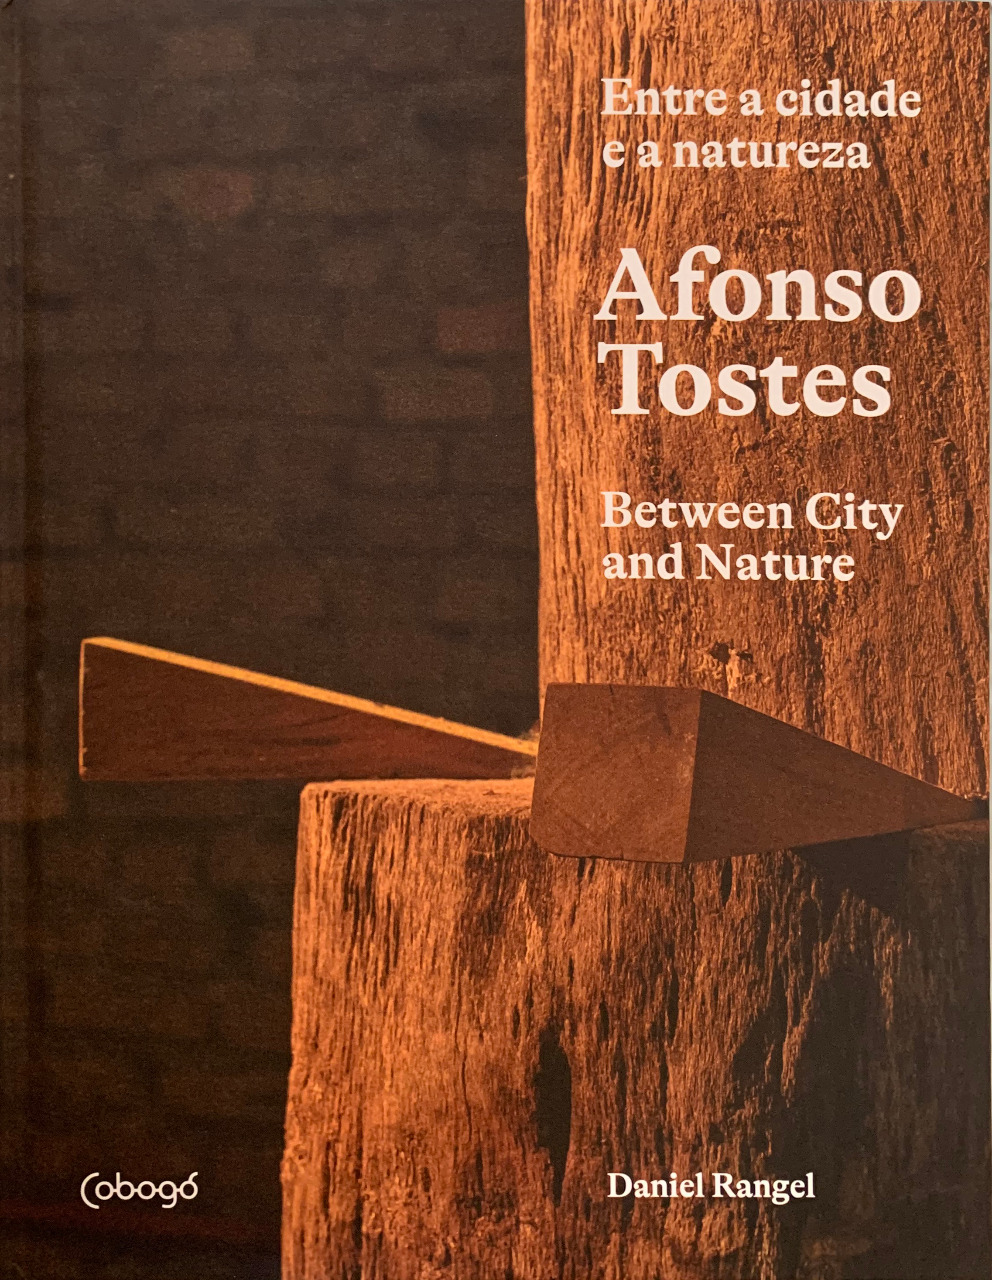 Book "Afonso Tostes: Between the city and nature", cover. Disclosure.